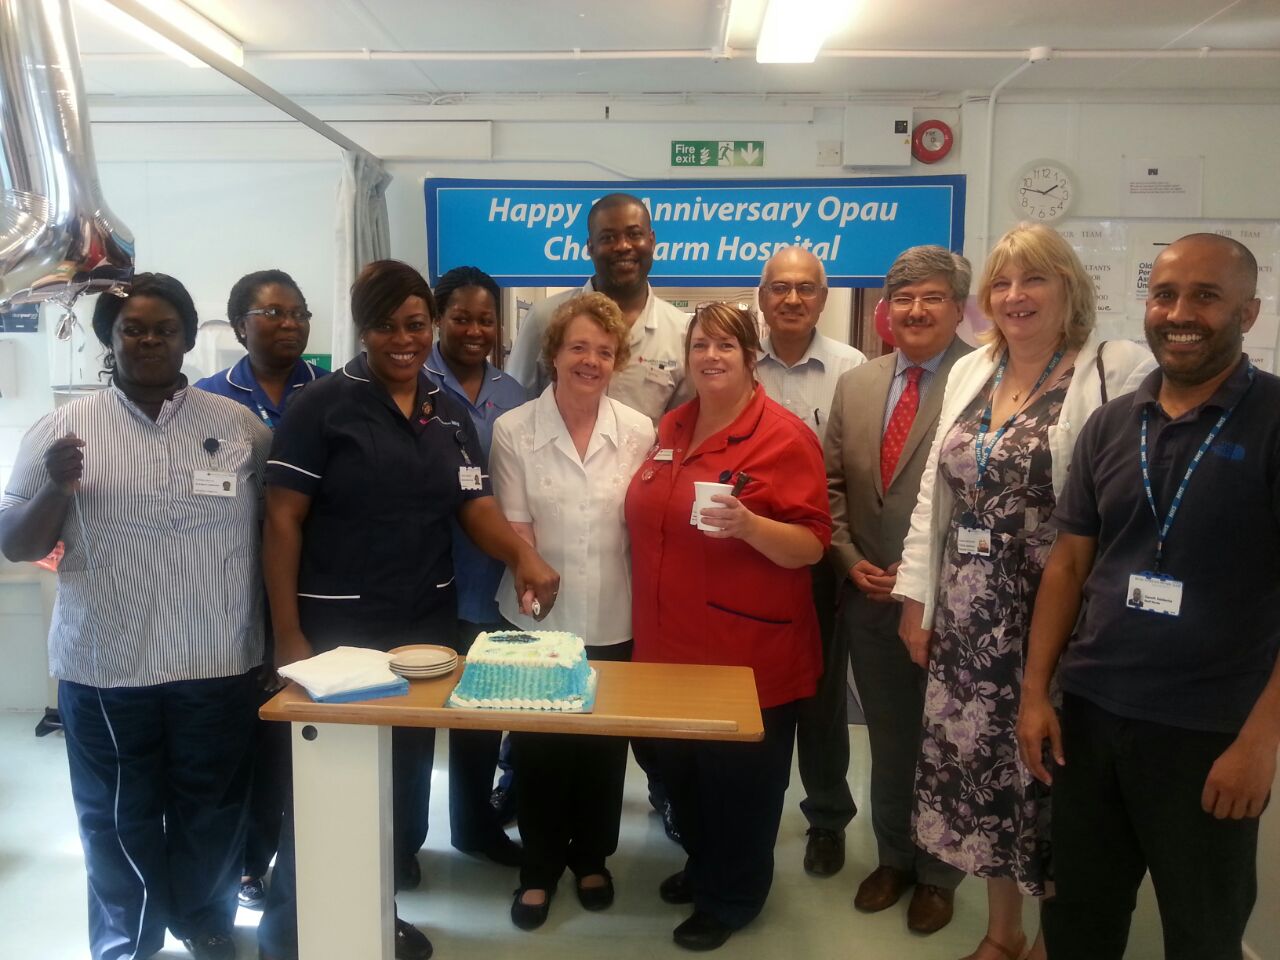 Staff celebrate the first birthday of the OPAU